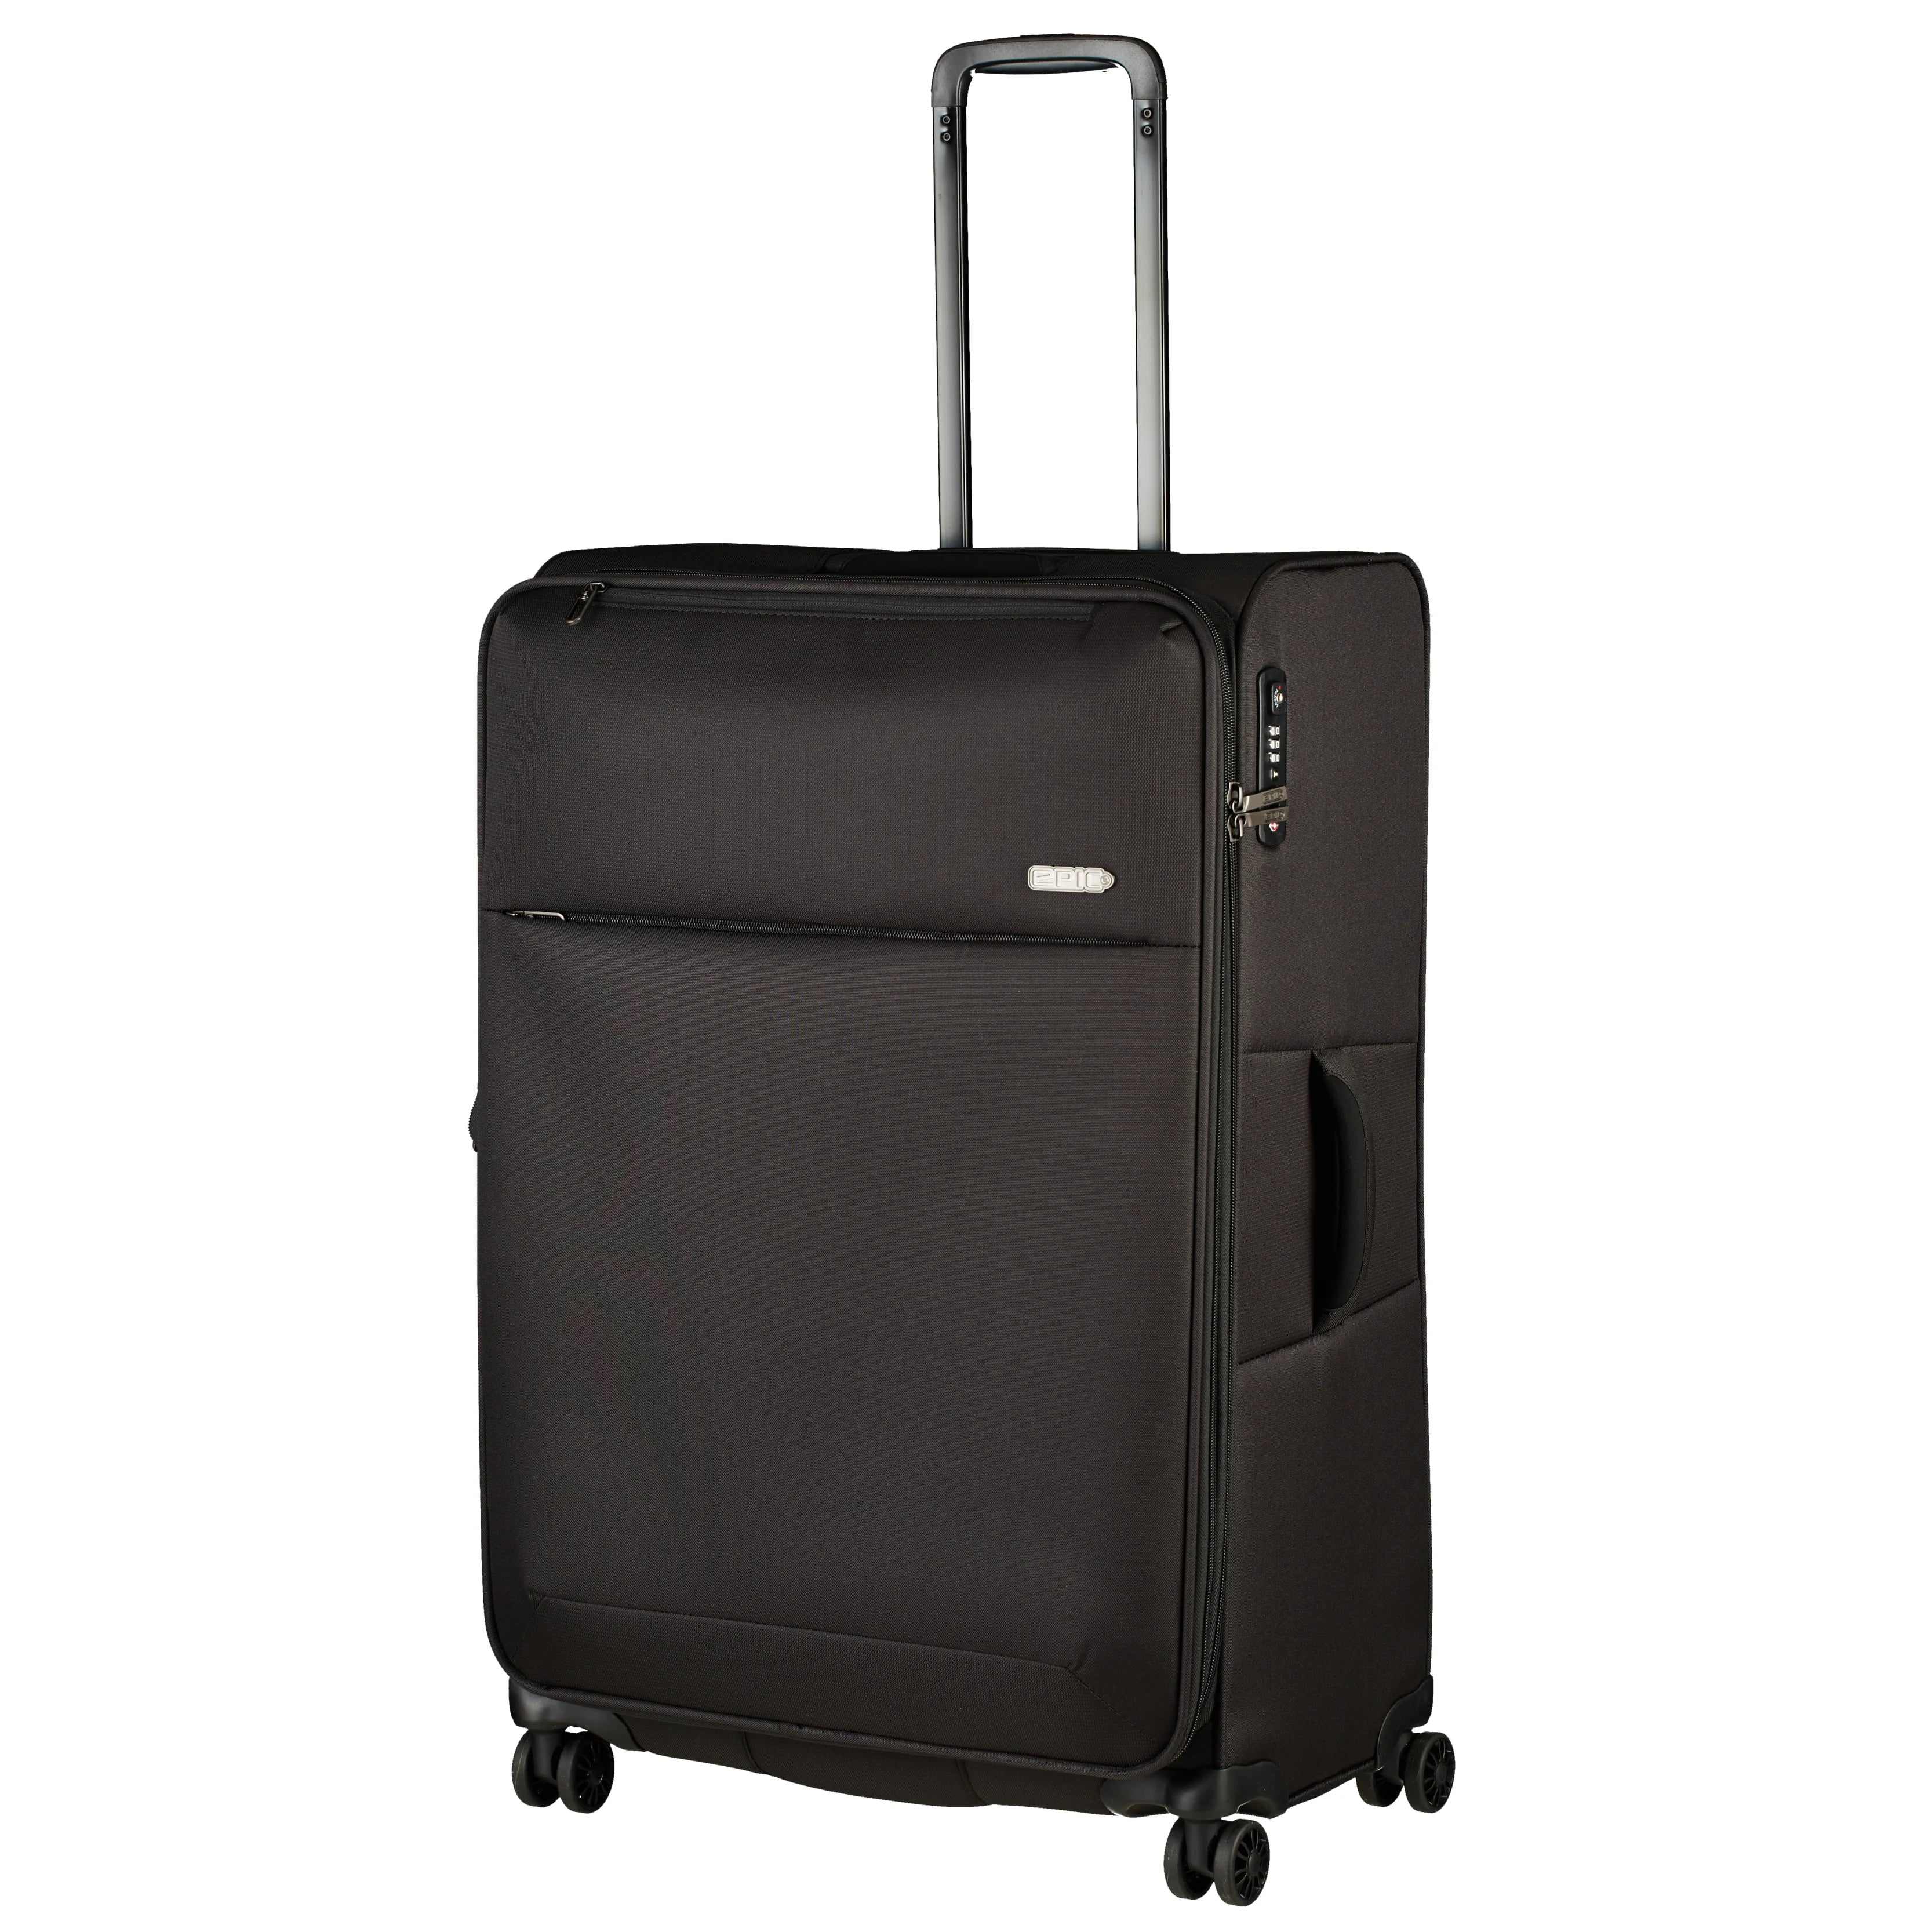 Epic Discovery Neo 4-wheel trolley 77 cm - black